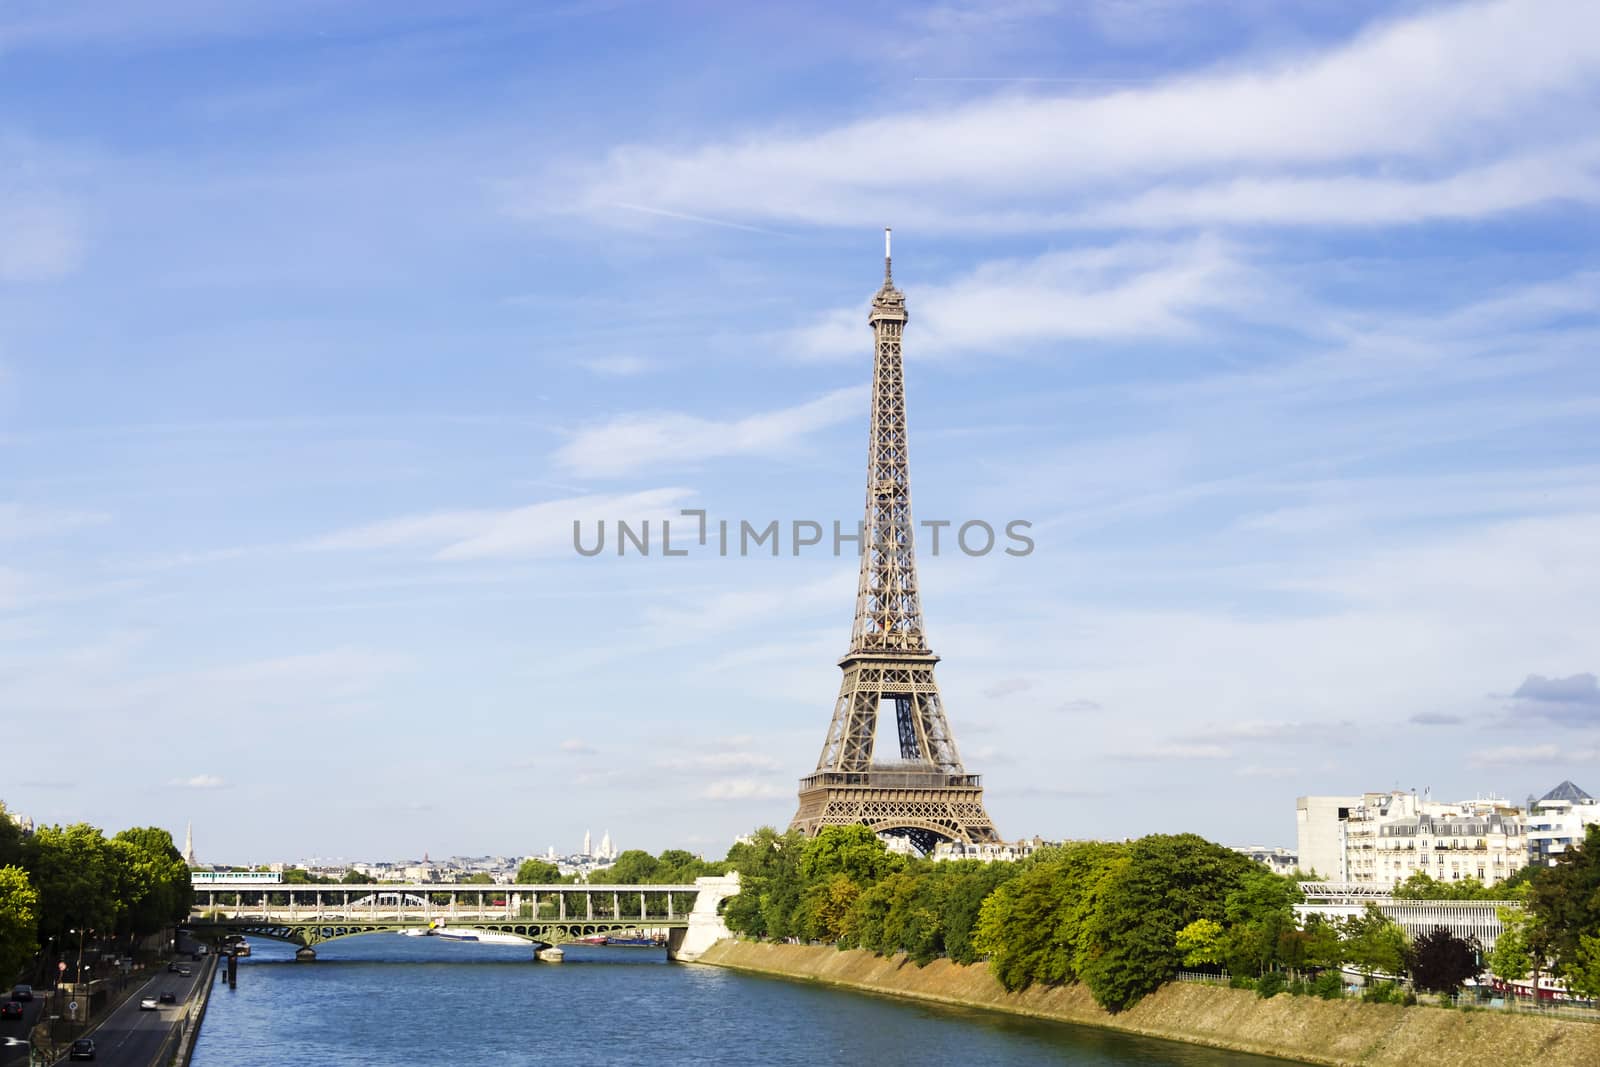 Eiffel Towerfrom the view over Siene, Paris, France by Tetyana